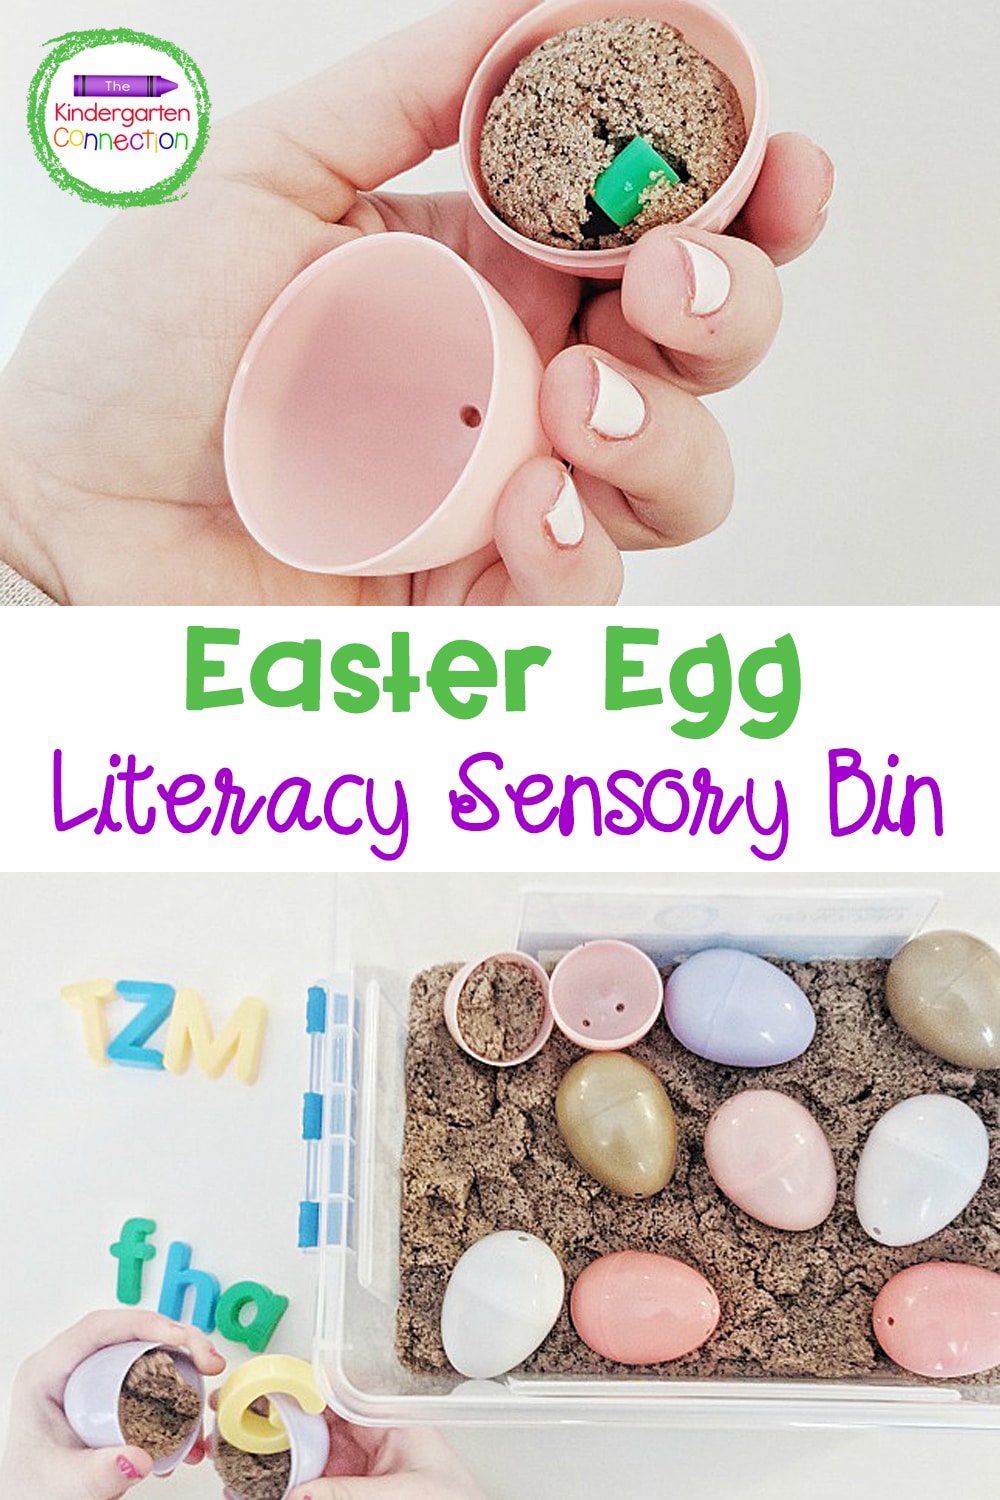 Find out how to make an Easter Egg Sensory Bin with frugal supplies that you already have on hand! Our favorite way to use this sensory bin is for a Letter Find activity!